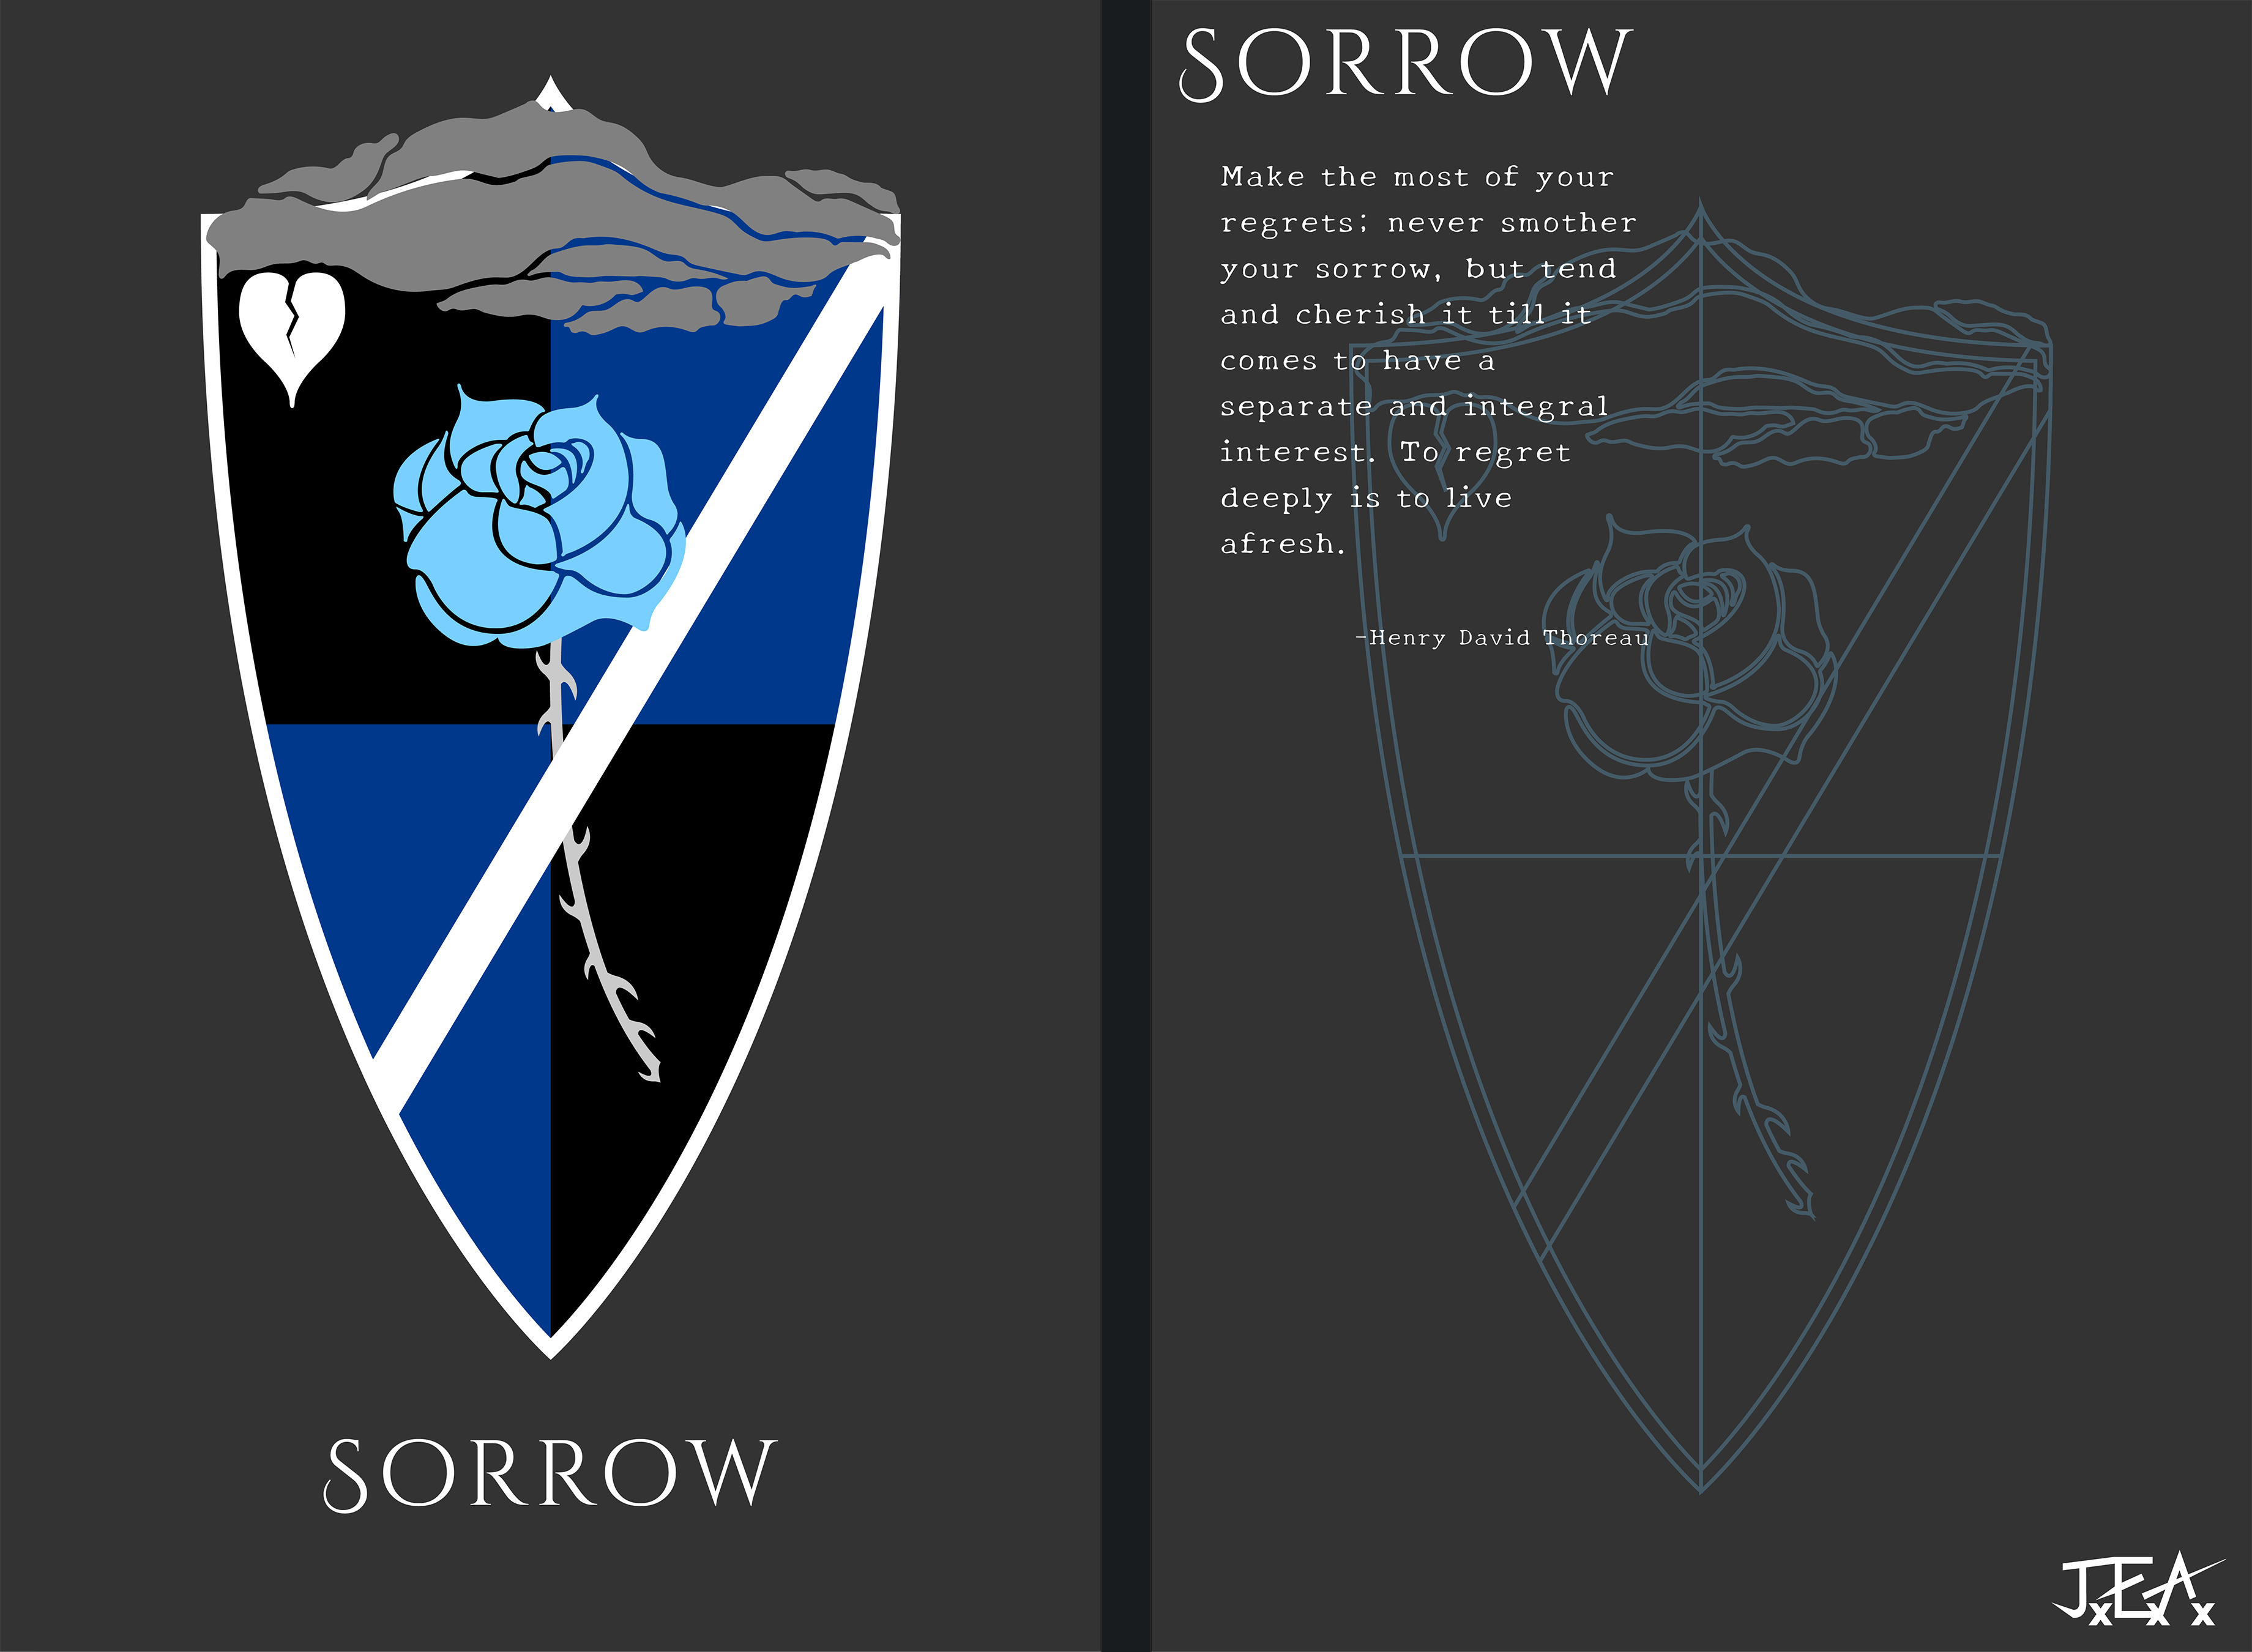 An insignia with a thinner pointier shield shape, featuring a 4 panel background, a blue and white rose, a broken heart and clouds above it all.